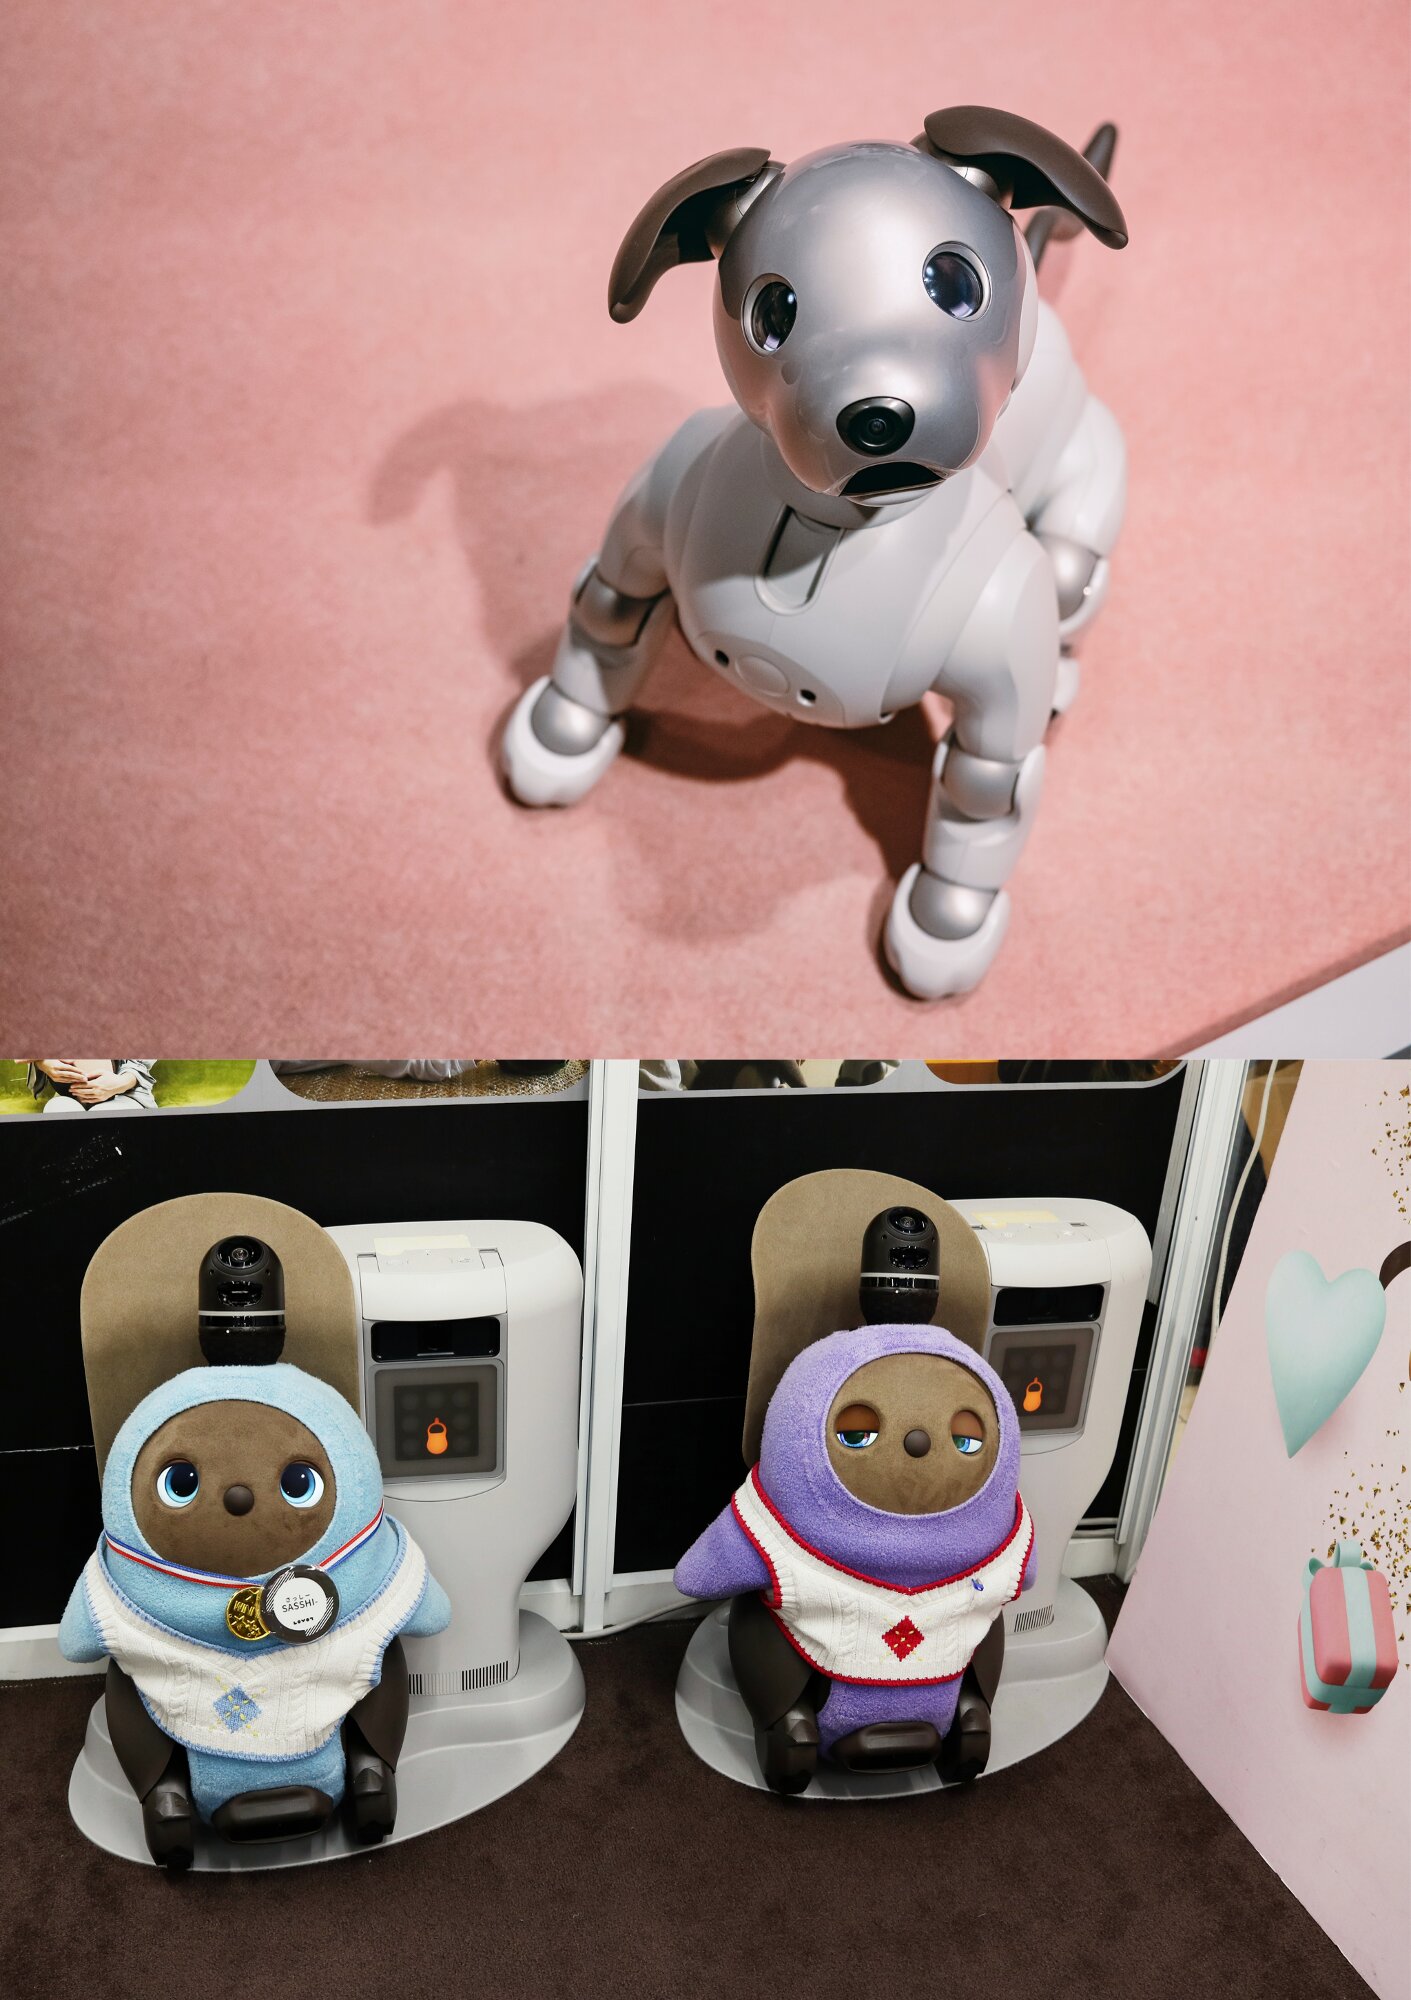 Loona PETBOT ペットロボット ルーナ All-inパッケージ - オーディオ機器